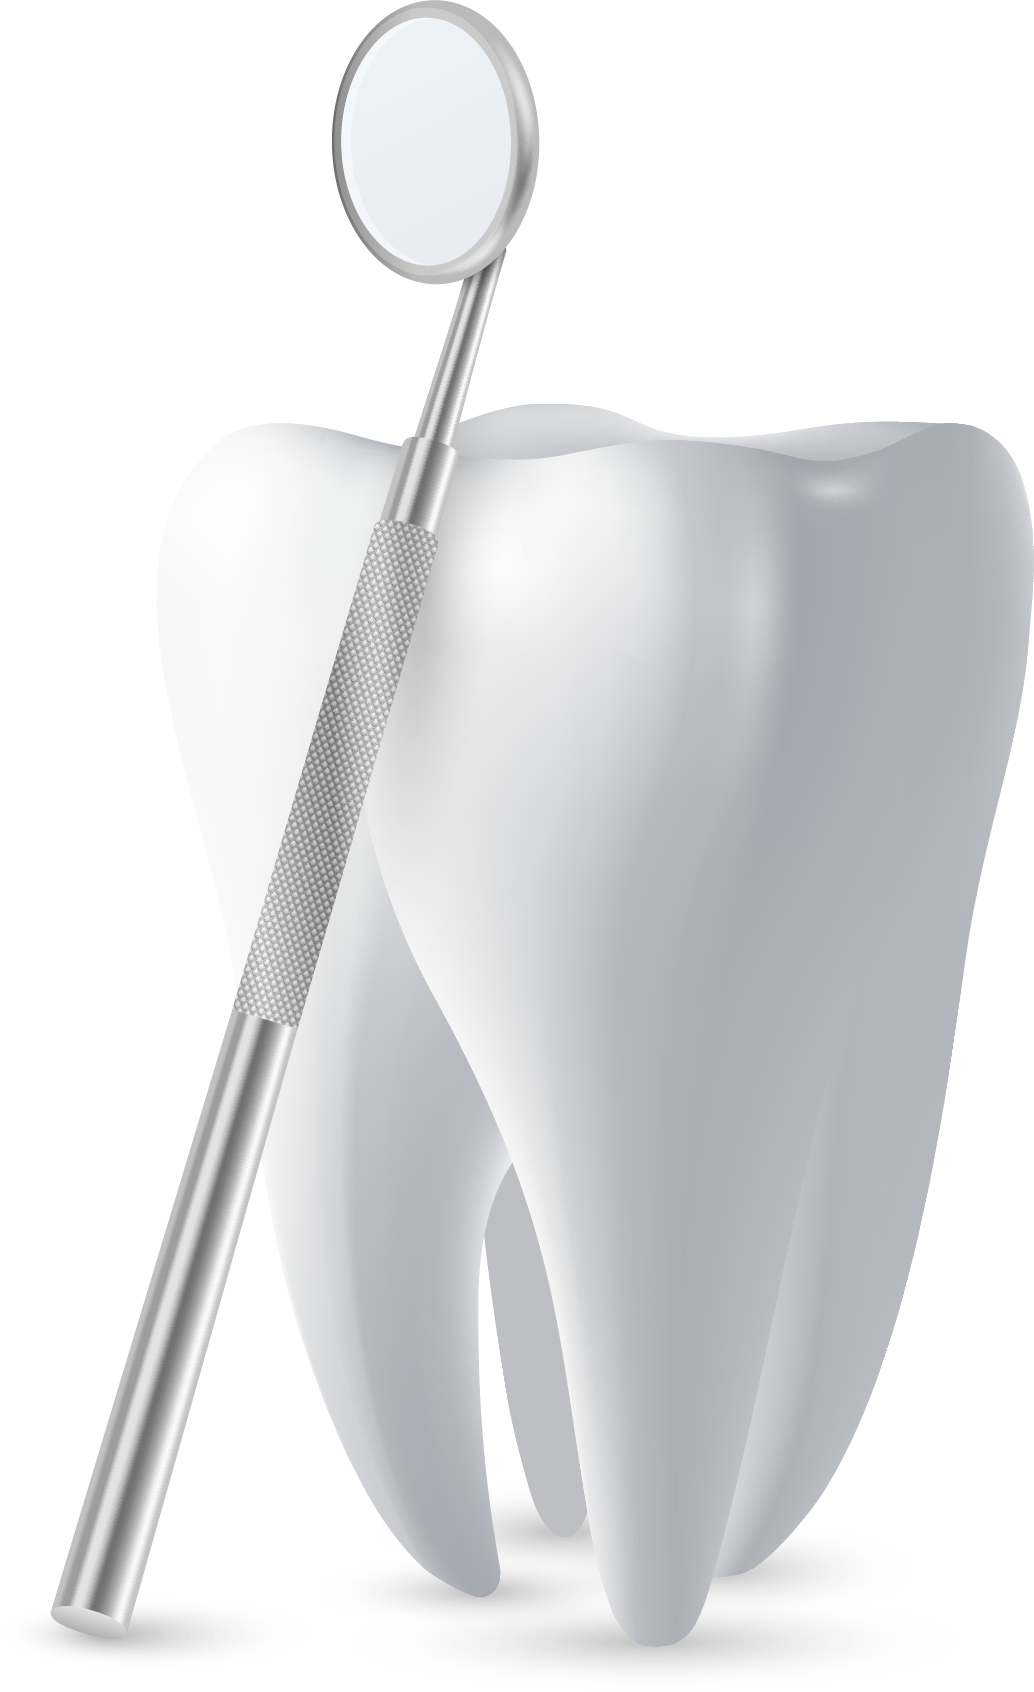 Tooth with Dentistry Equipment 3 - Charlotte, NC - Northlake Dentistry